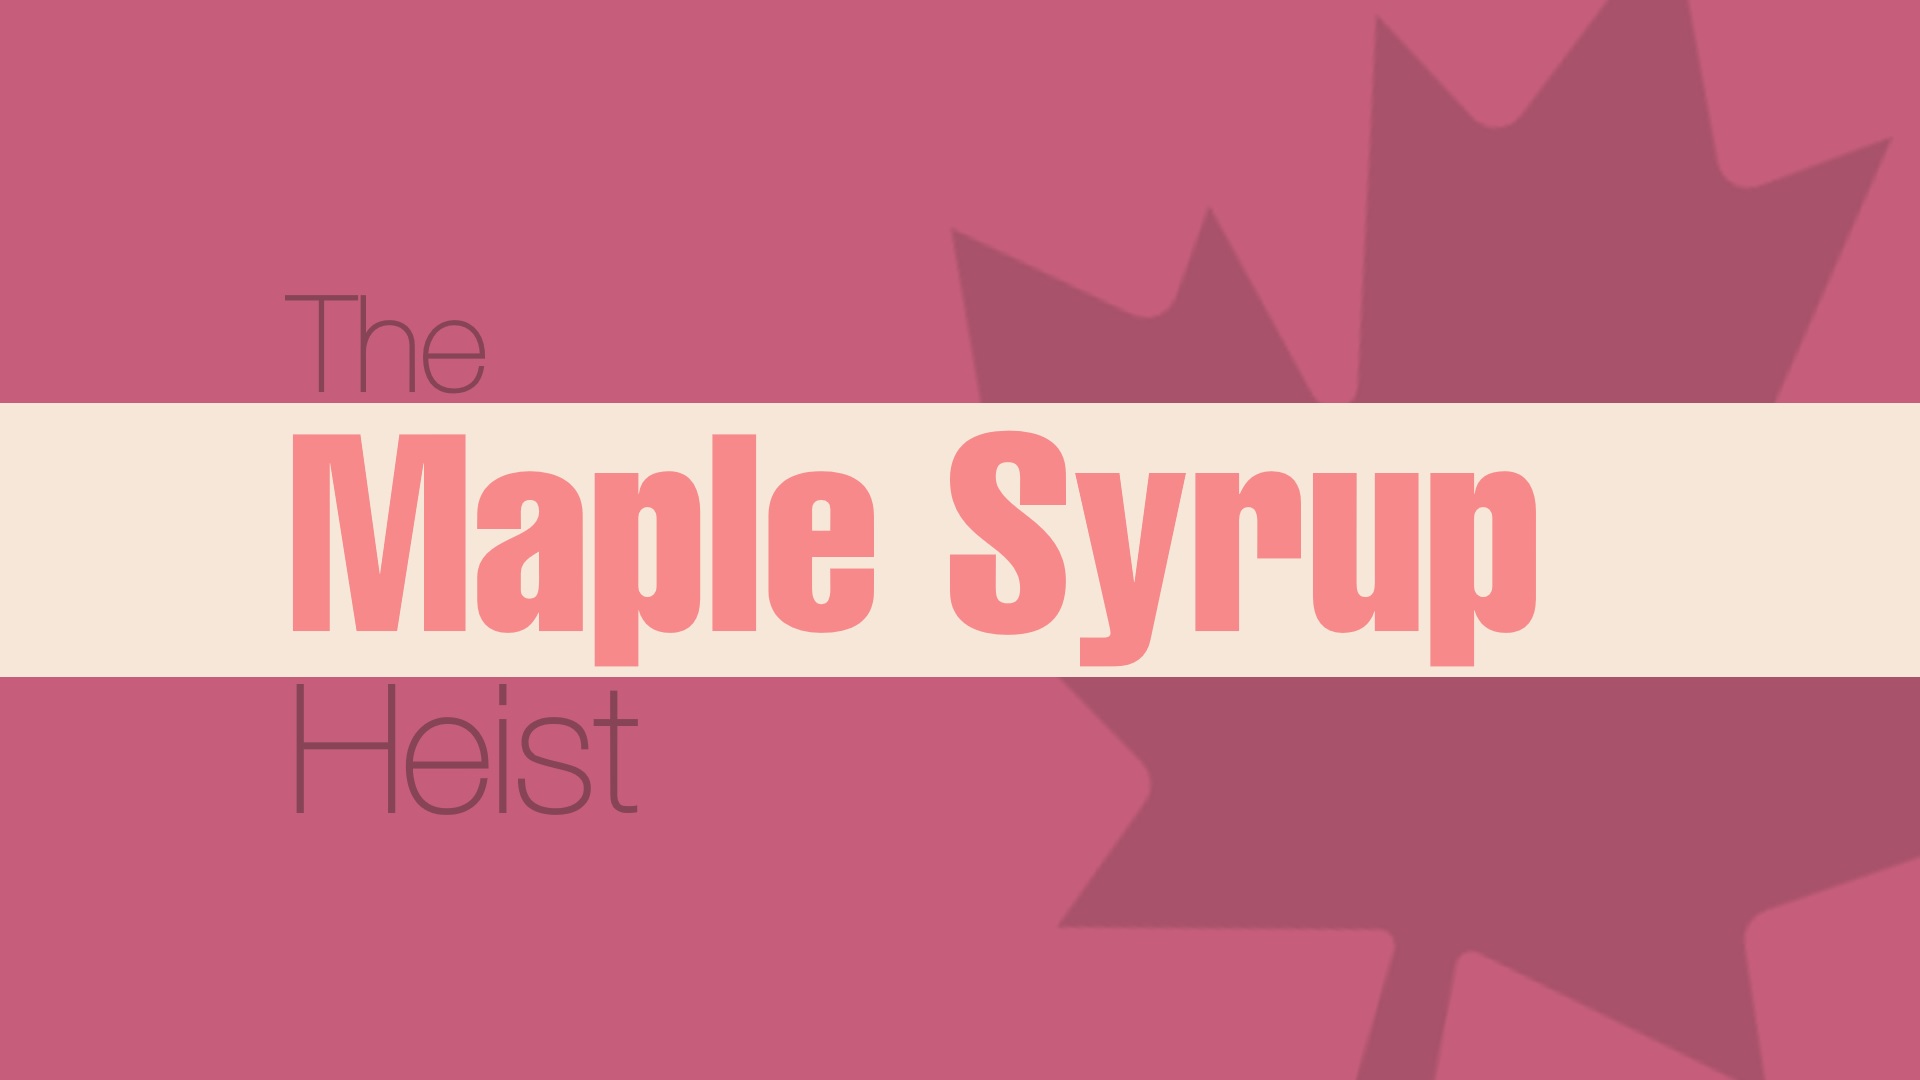 The Maple Syrup Heist